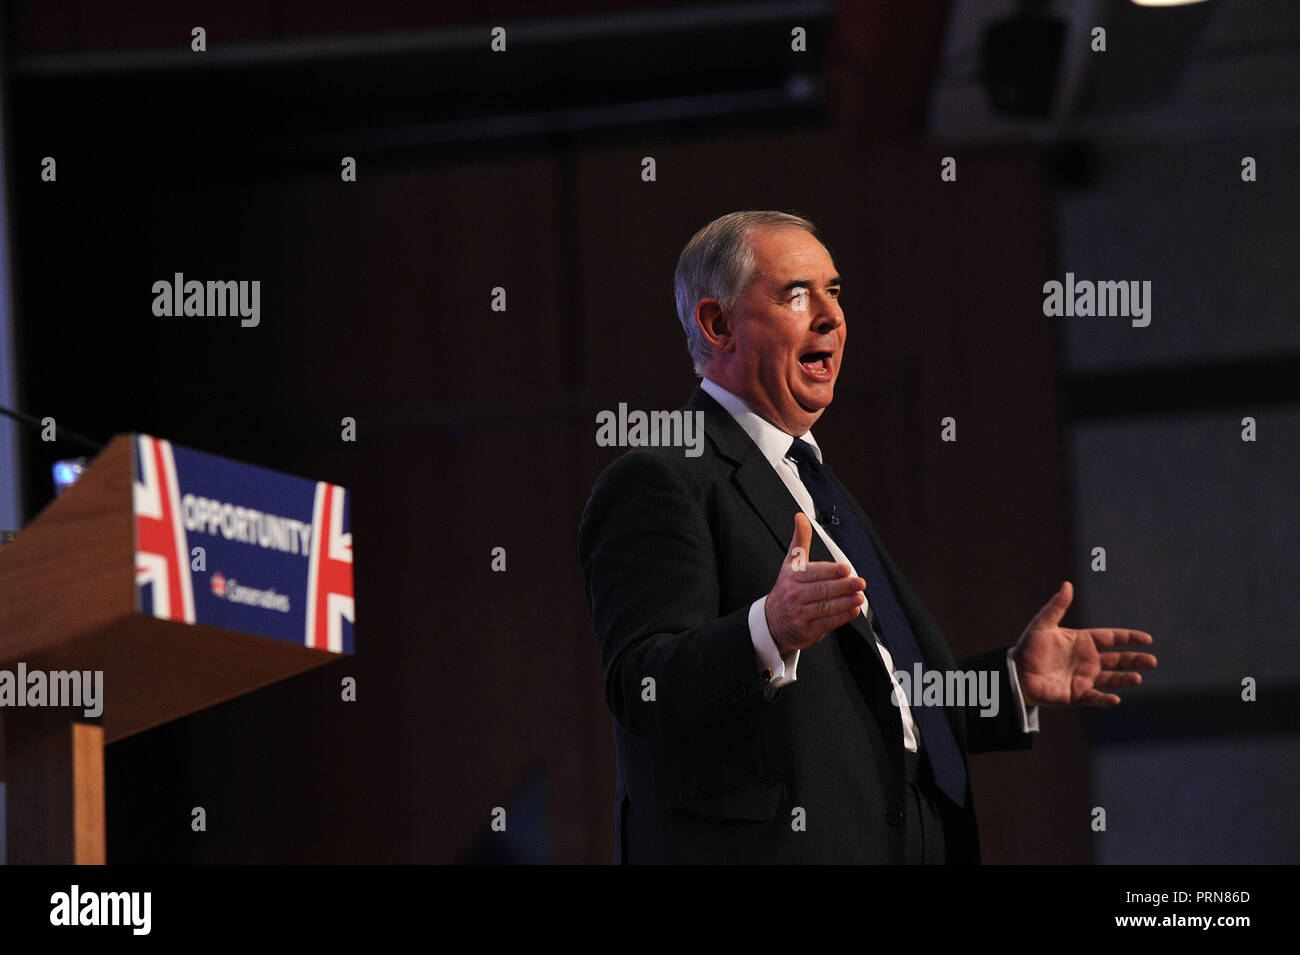 Birmingham, England. 3rd October, 2018.  Geoffrey Cox MP, Attorney General , speaking before keynote speech of Theresa May MP, Prime Minister and Leader of the Conservative Party, on the closing session of the fourth day of the Conservative Party annual conference at the ICC.  Kevin Hayes/Alamy Live News Stock Photo